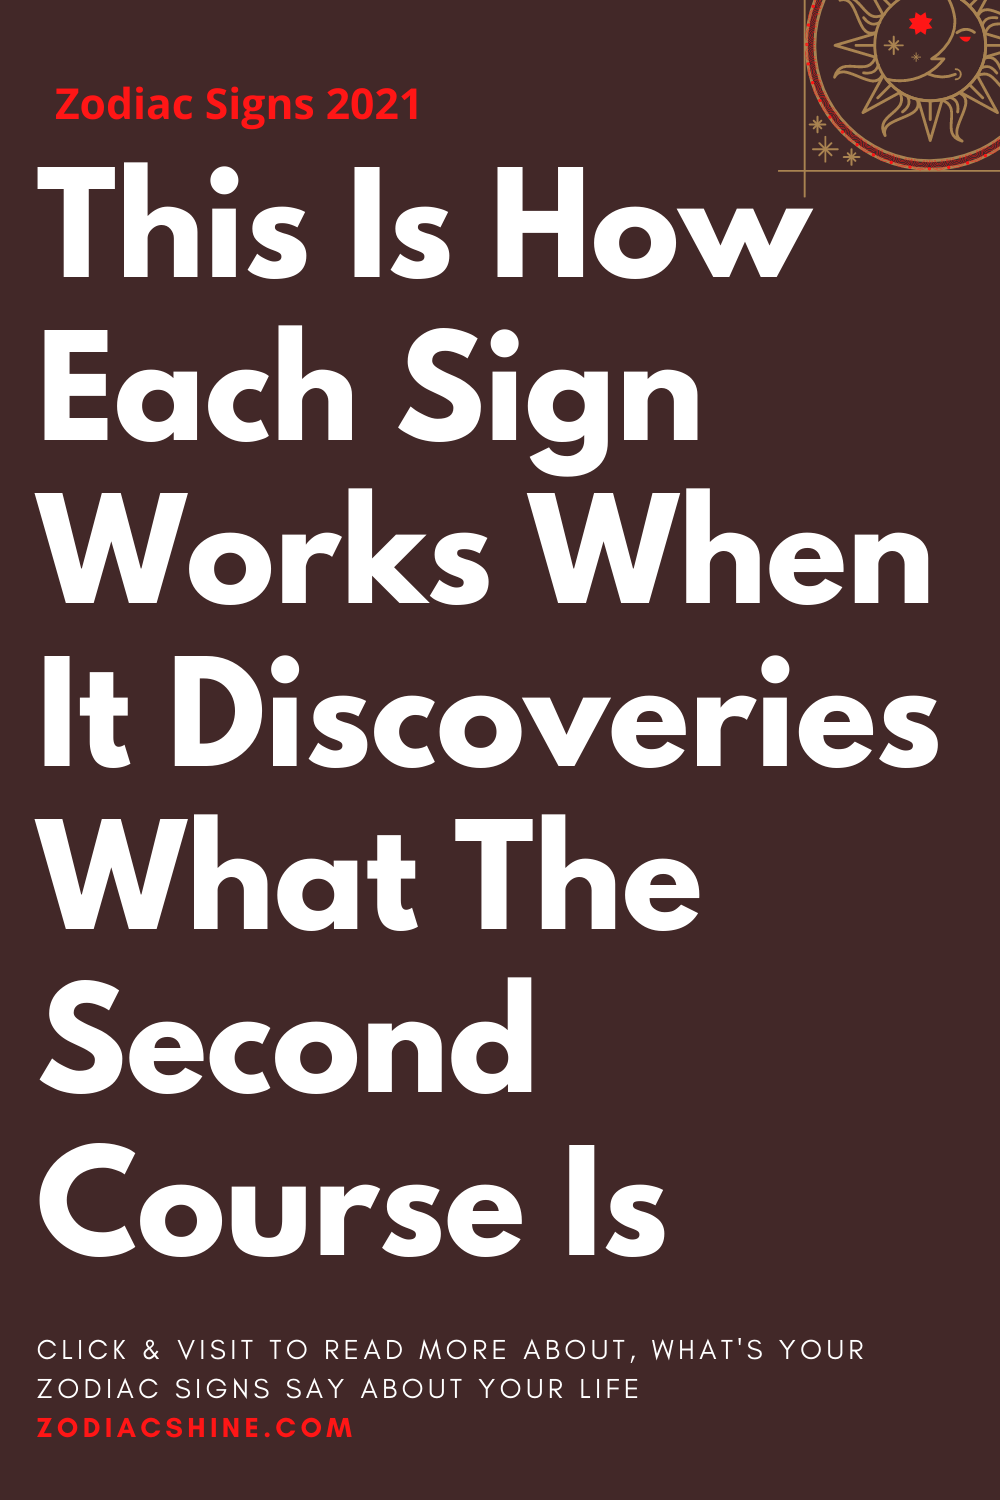 This Is How Each Sign Works When It Discoveries What The Second Course Is